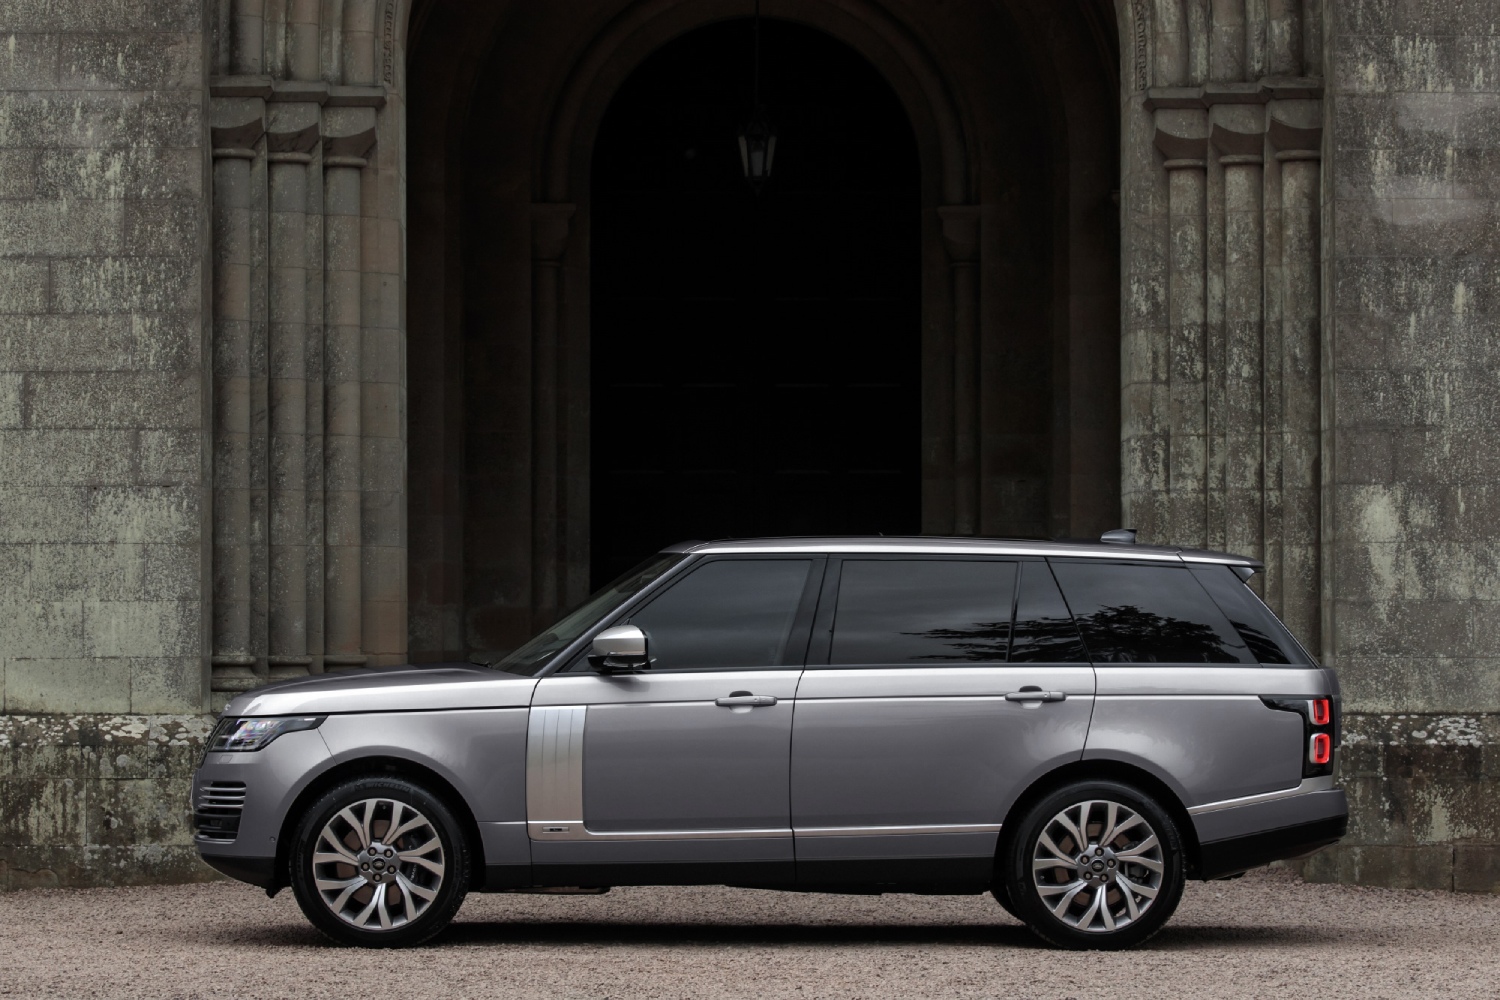 Used luxury SUVs like the Land Rover Range Rover can be a headache